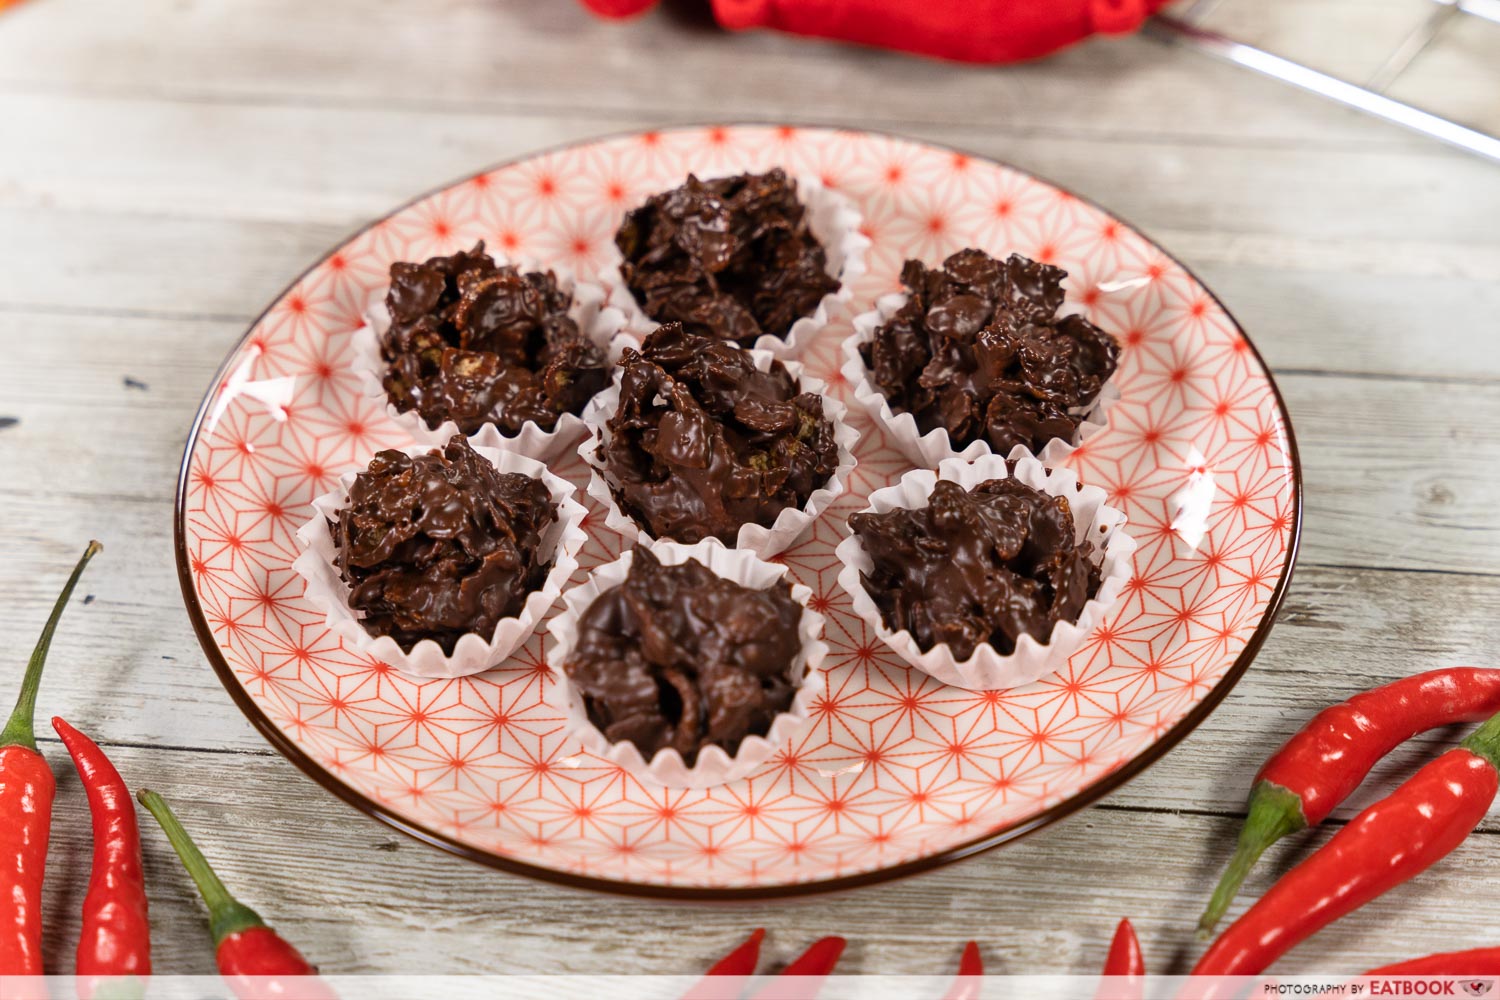 cny snack recipes - spicy chocolate cornflake clusters